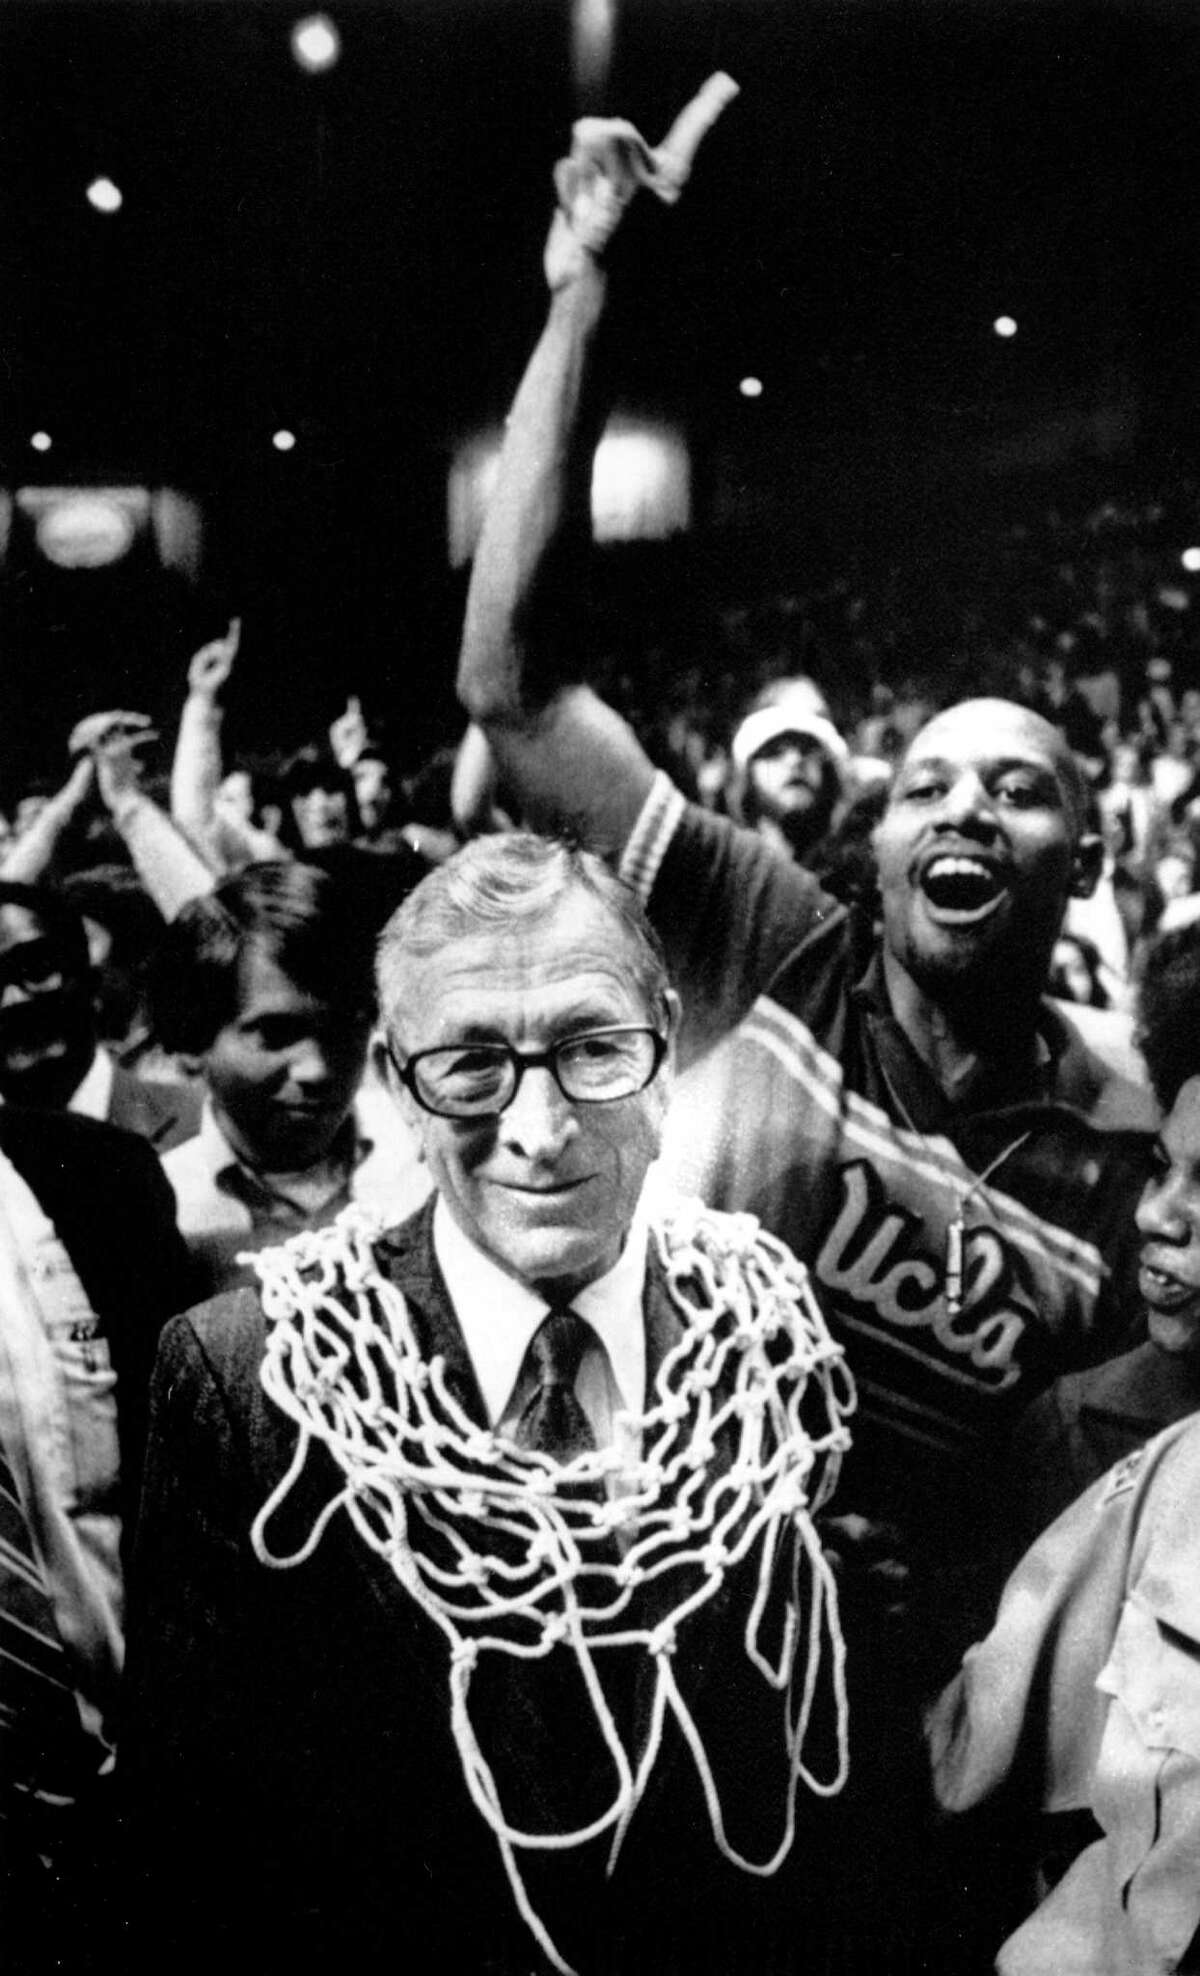 In this March 31, 1975 photo, UCLA basketball coach John Wooden wears a basketball net around his neck after his team won the NCAA basketball championship over Kentucky, 92-85, in San Diego, Calif.